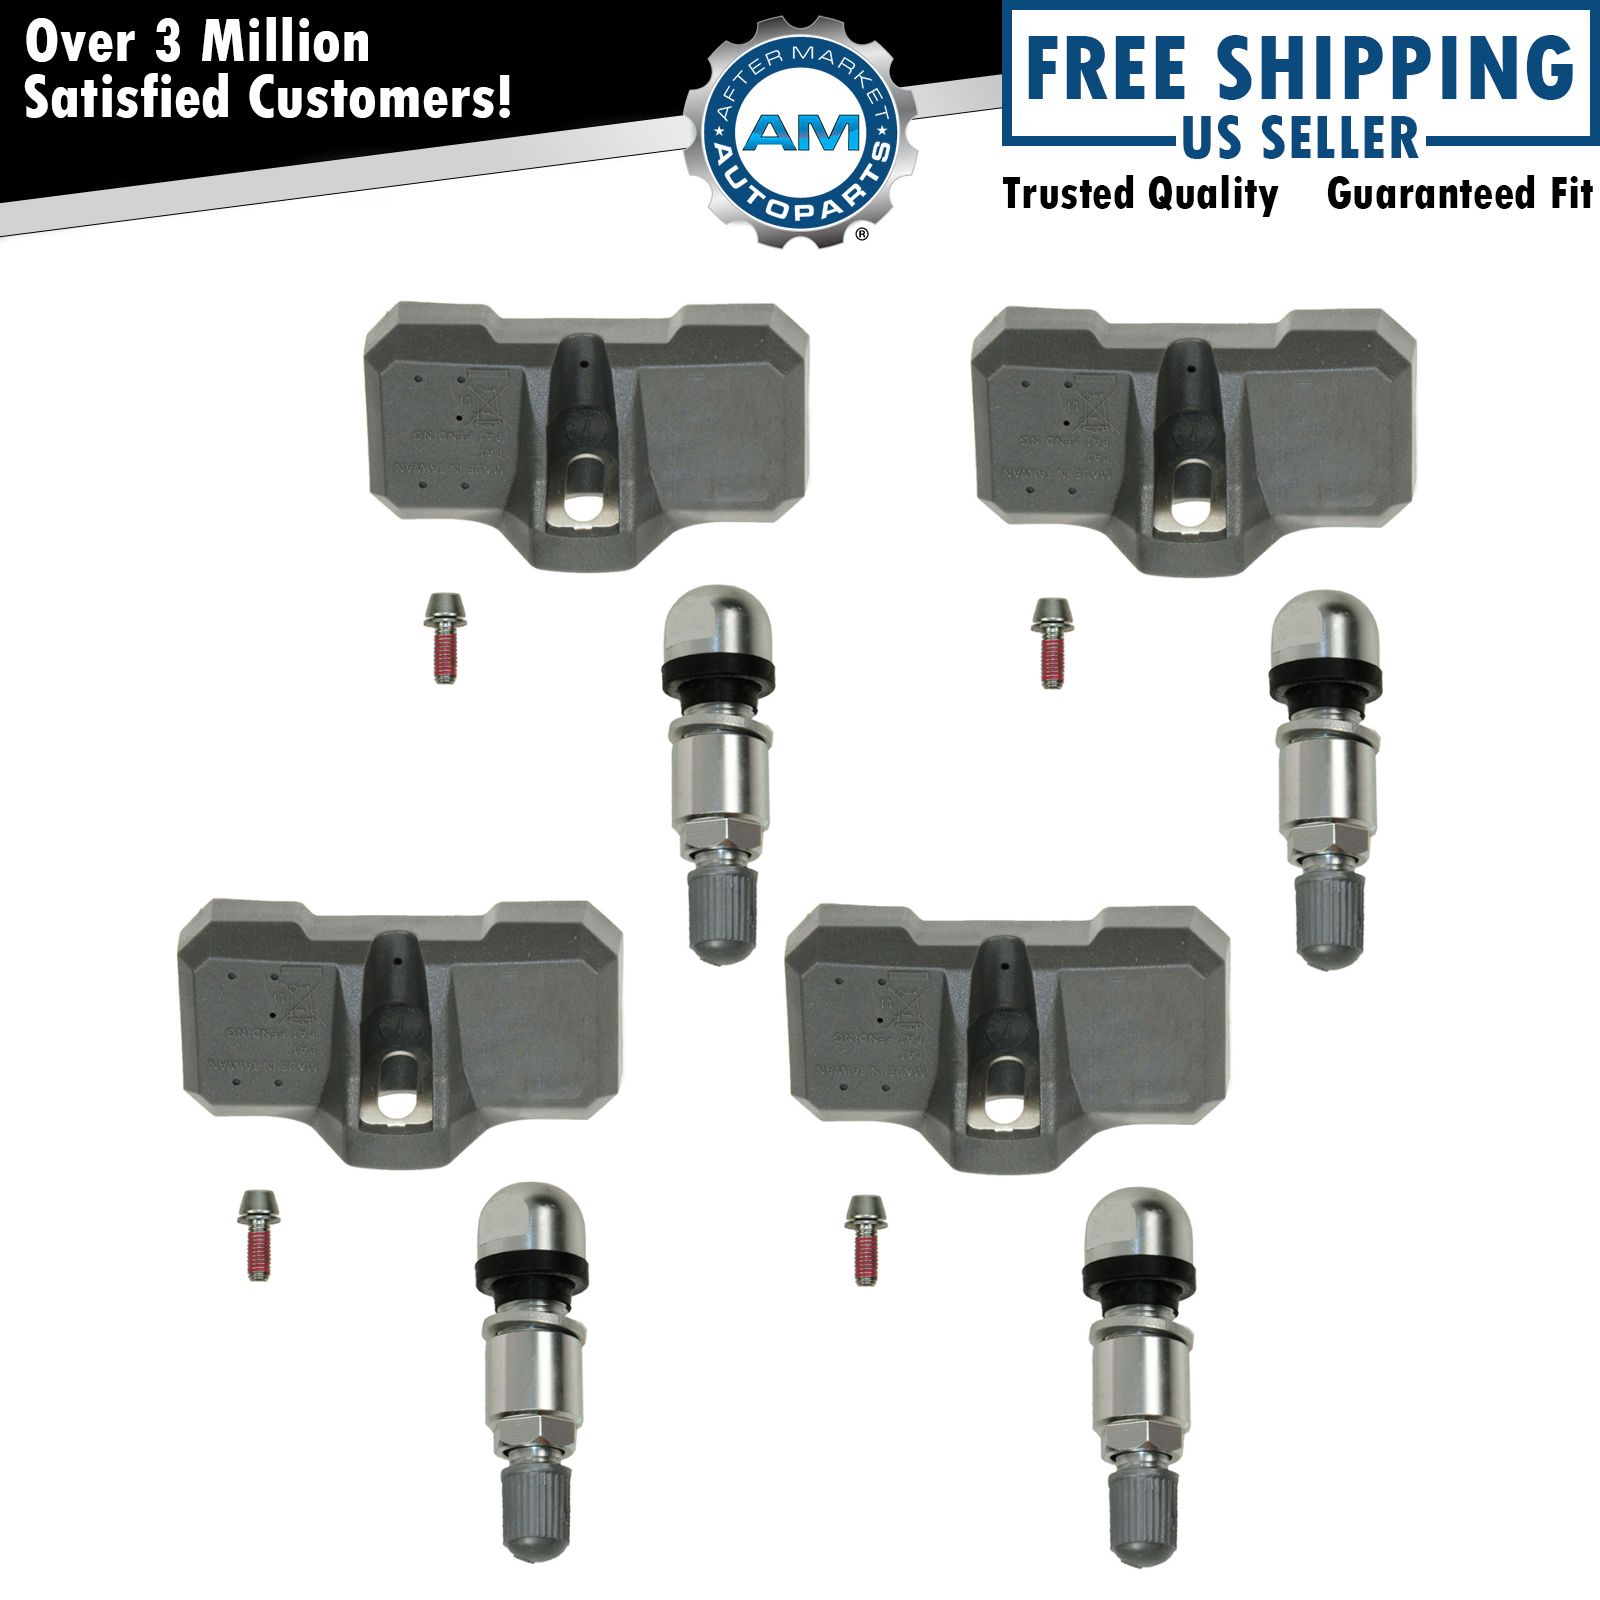 Tire Pressure Sensor Monitoring System TPMS 4 Piece Set Kit for Chevy GMC Truck